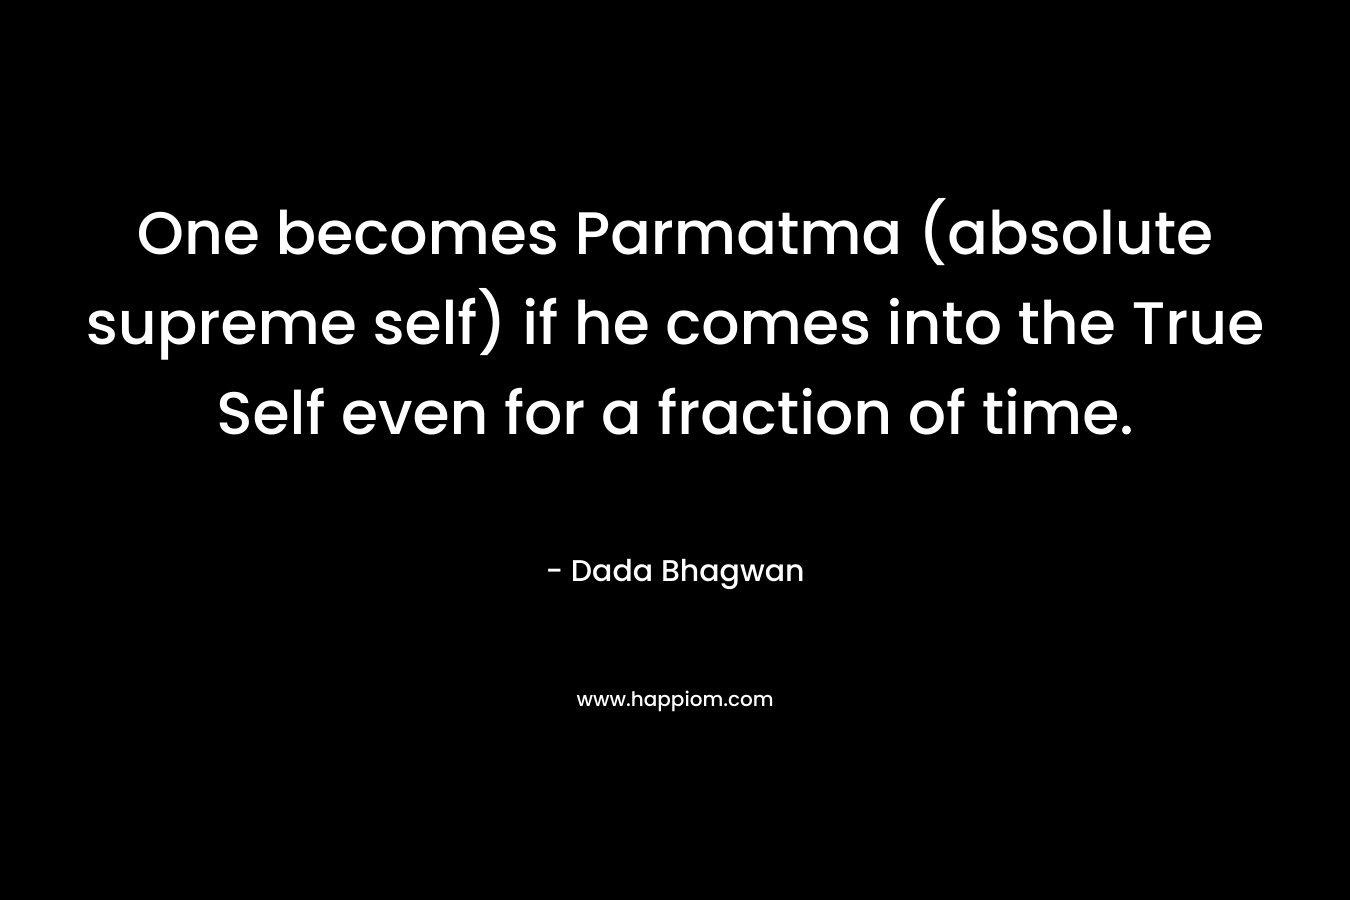 One becomes Parmatma (absolute supreme self) if he comes into the True Self even for a fraction of time. – Dada Bhagwan